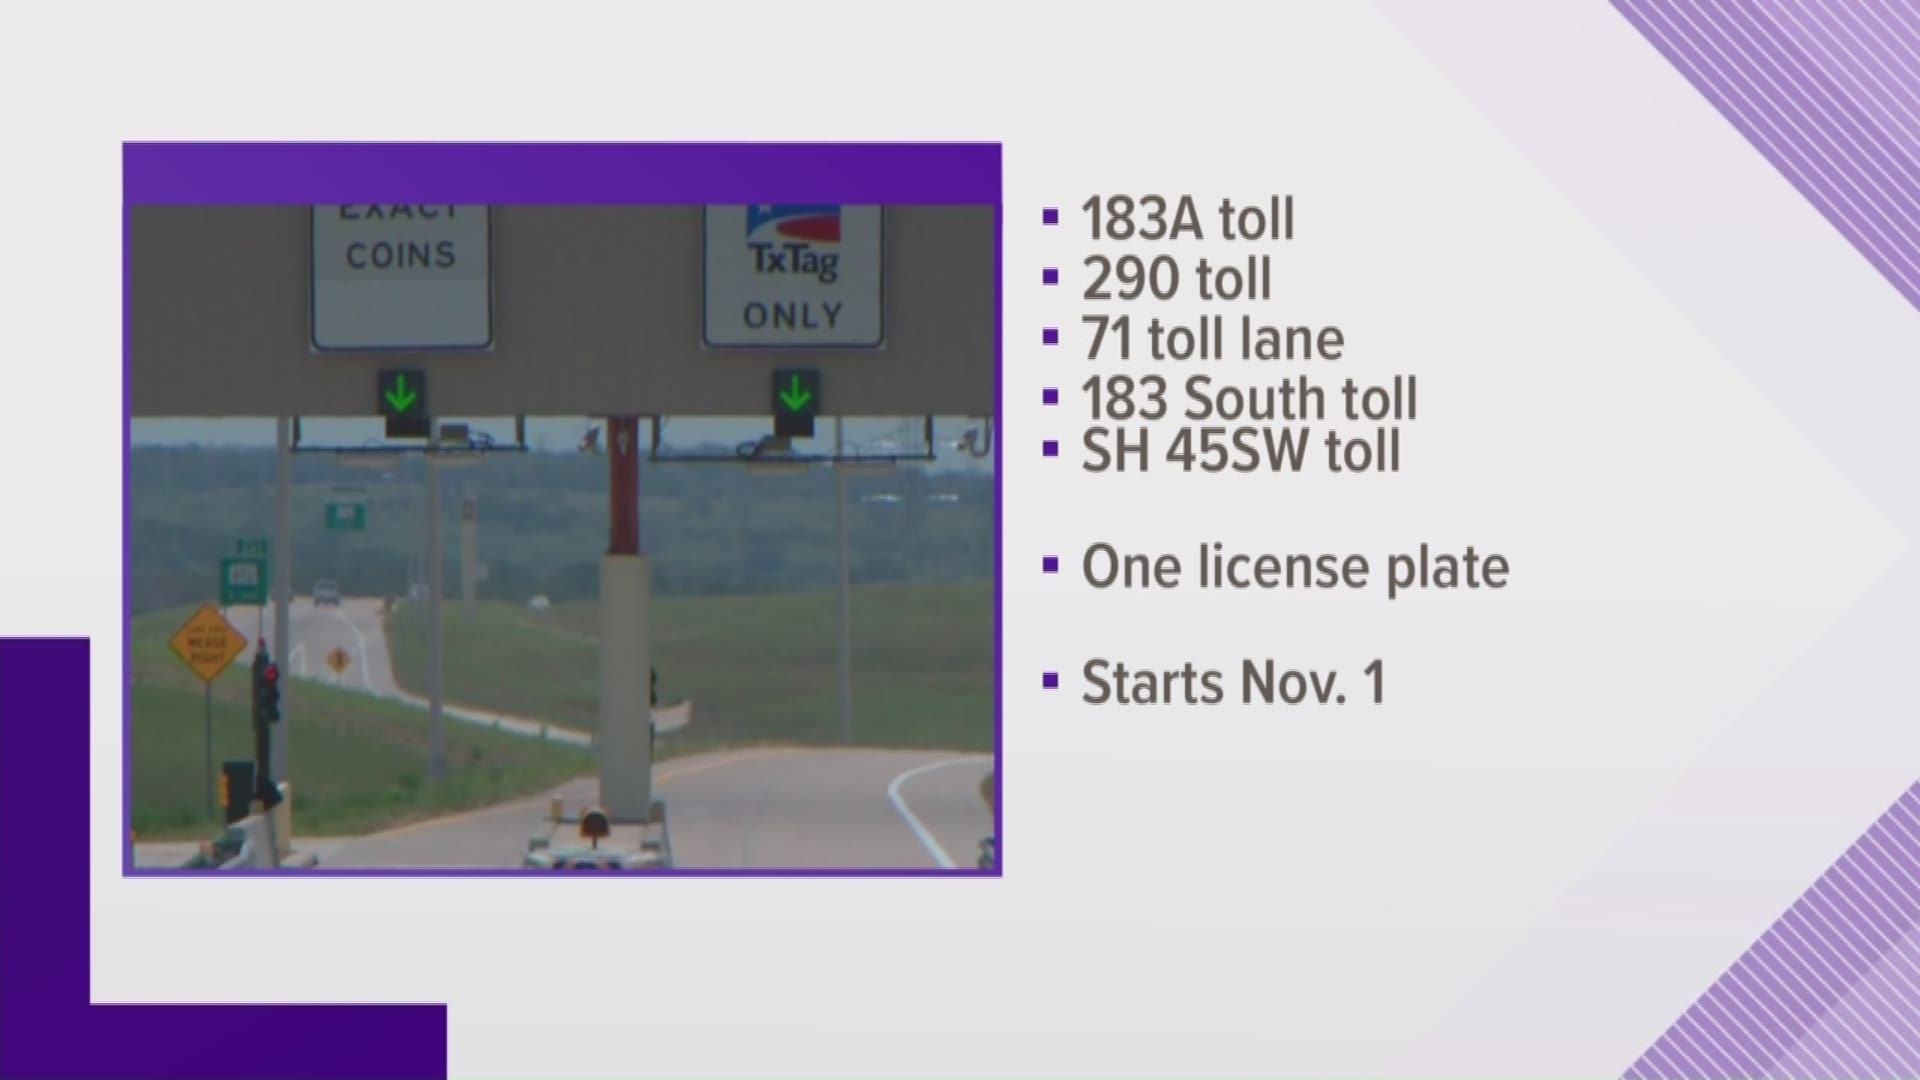 A new discount program means veterans will now be able to drive toll free on Central Texas tolls.